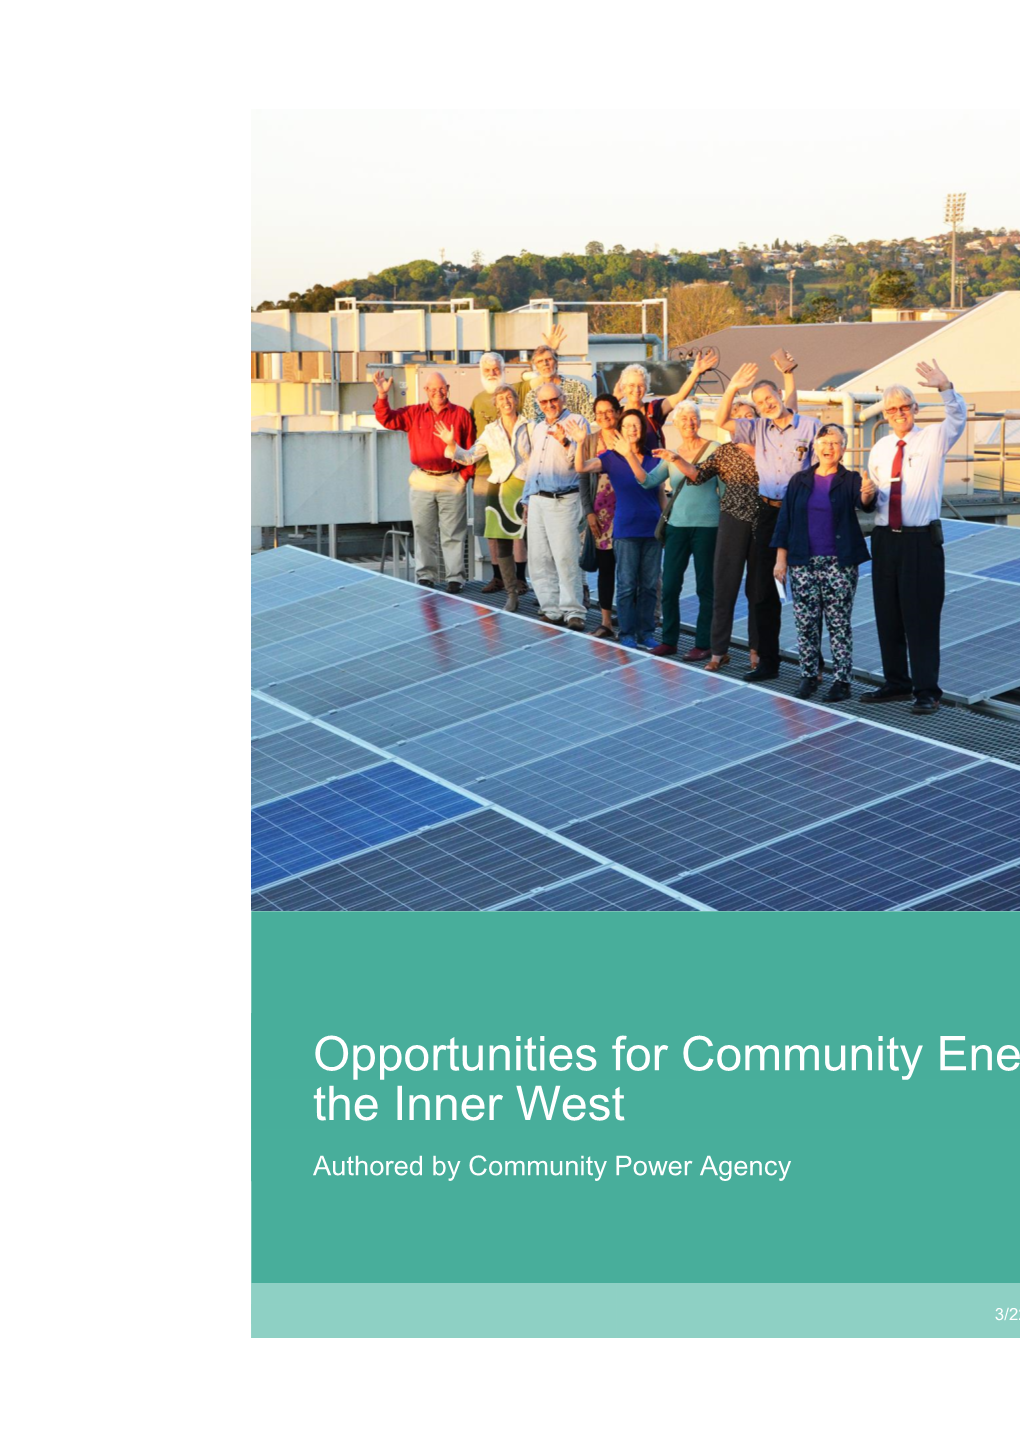 Opportunities for Community Energy in the Inner West Authored by Community Power Agency